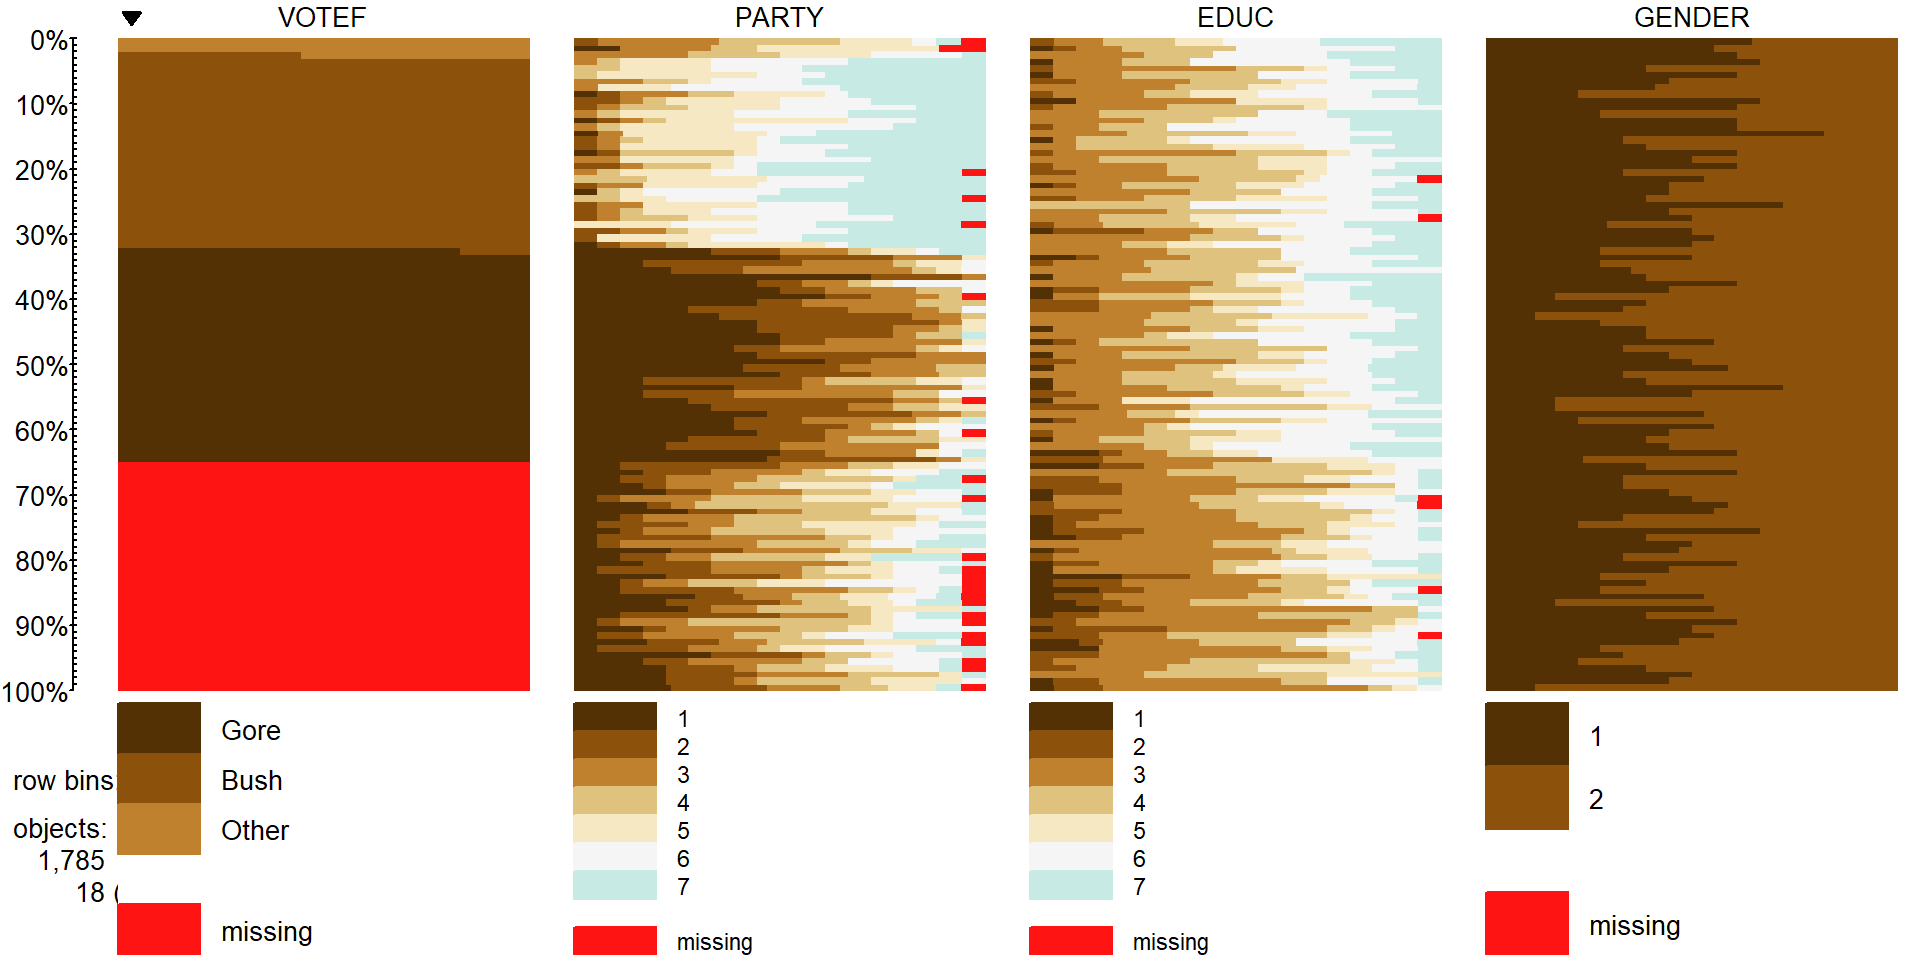 Tableplot of vote, party affiliation, education, and gender from election survey data. Note that missing observations are present in all variables except for Gender. Education is coded from 1 to 7 with higher values related to higher educational attainment. Gender code 1 is for male and 2 is for female.